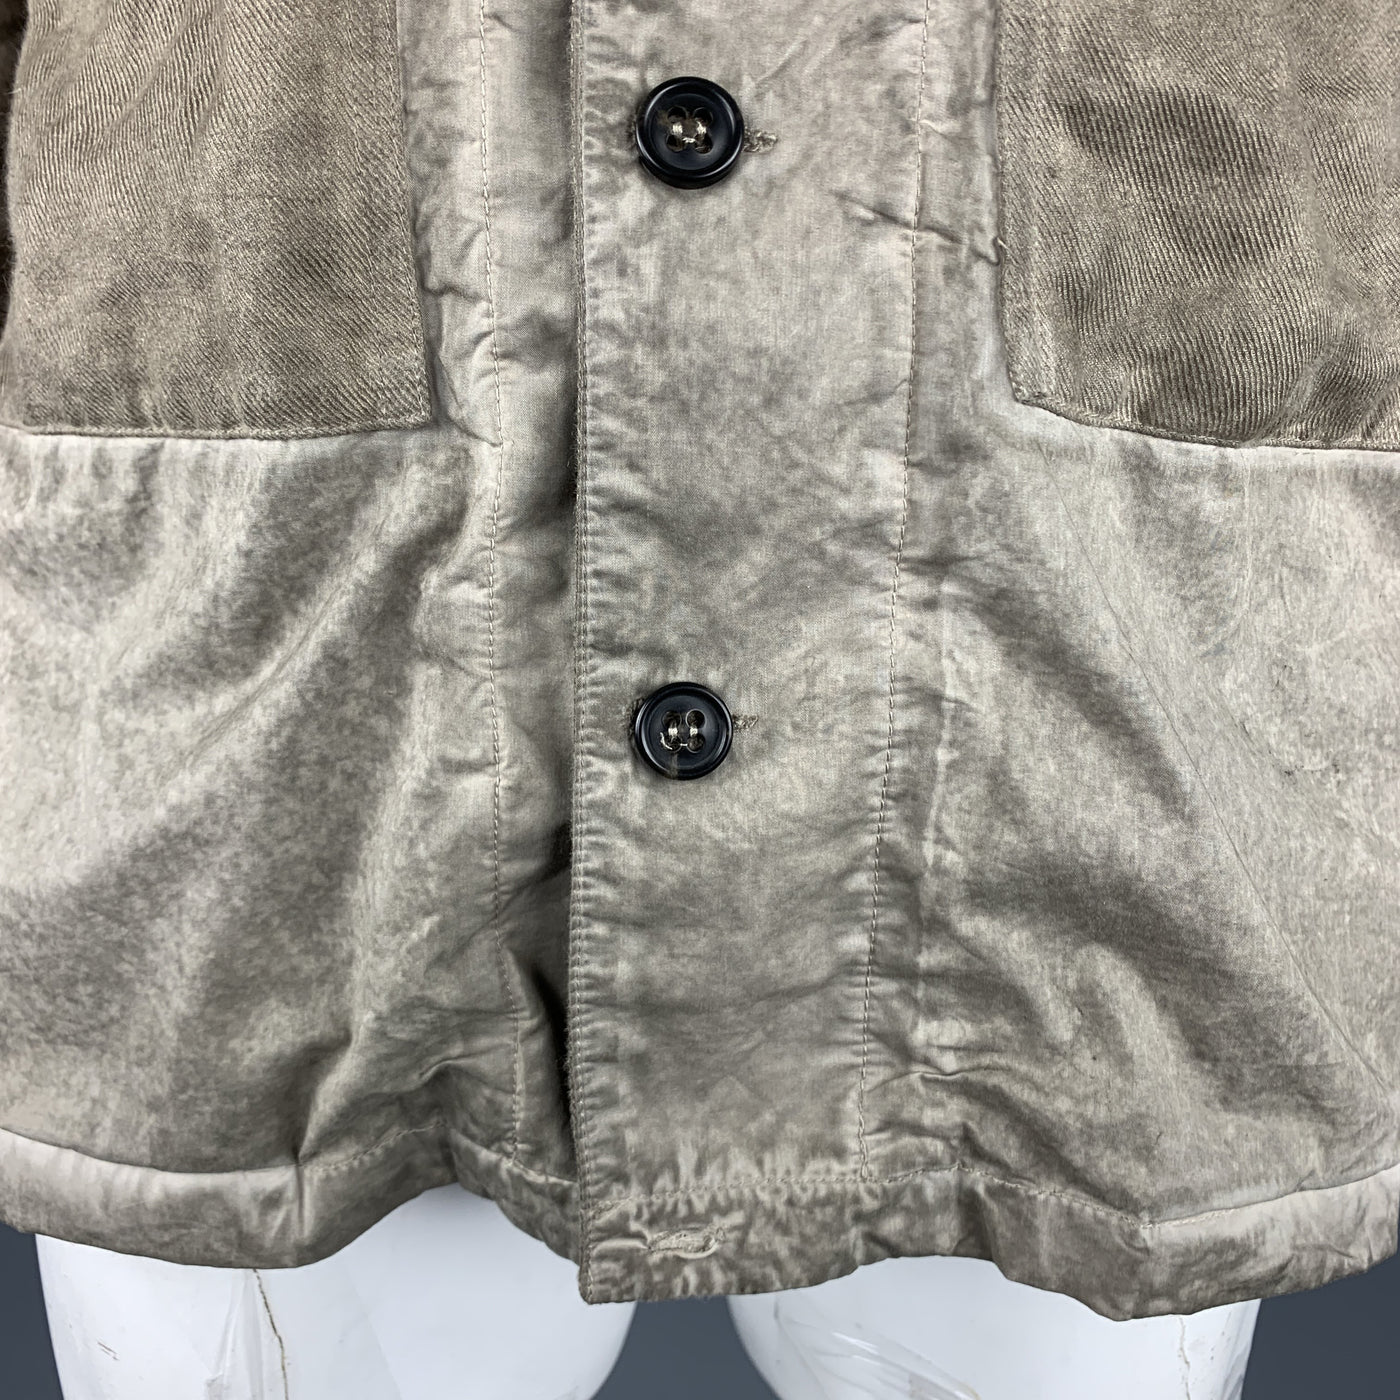 SILENT by DAMIR DOMA L Taupe Distressed Cotton Blend Buttoned Jacket